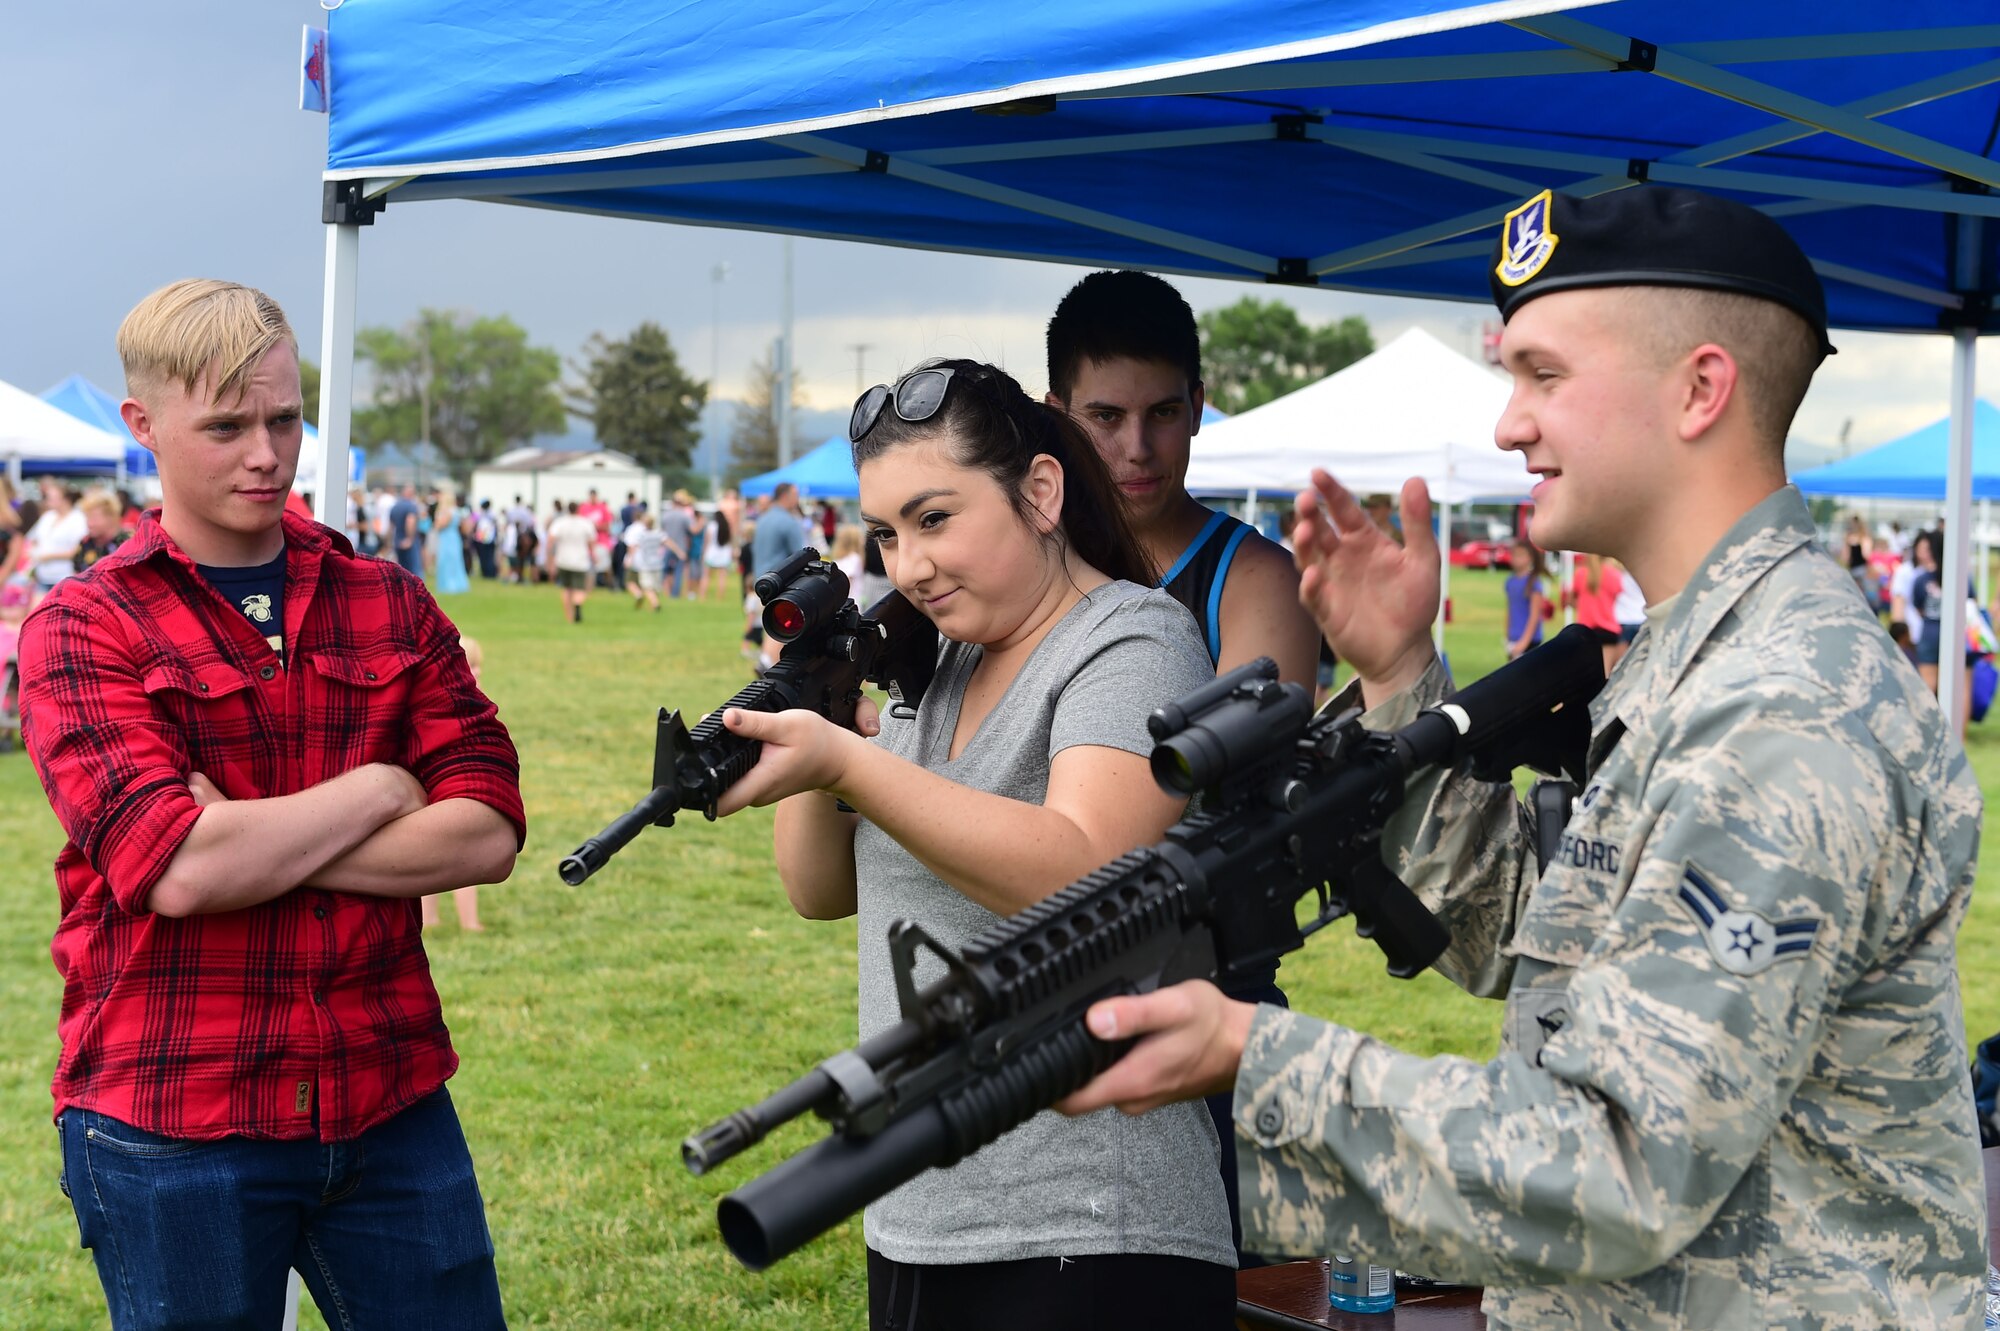 A member of the 460th Security Forces Squadron demonstrates how to use a weapon during FunFest July 24, 2015, at Buckley Air Force Base, Colo. FunFest is an annual base-wide event that includes family-friendly games and activities, community involvement and local business sponsors. (U.S. Air Force photo by Airman 1st Class Luke W. Nowakowski/Released)